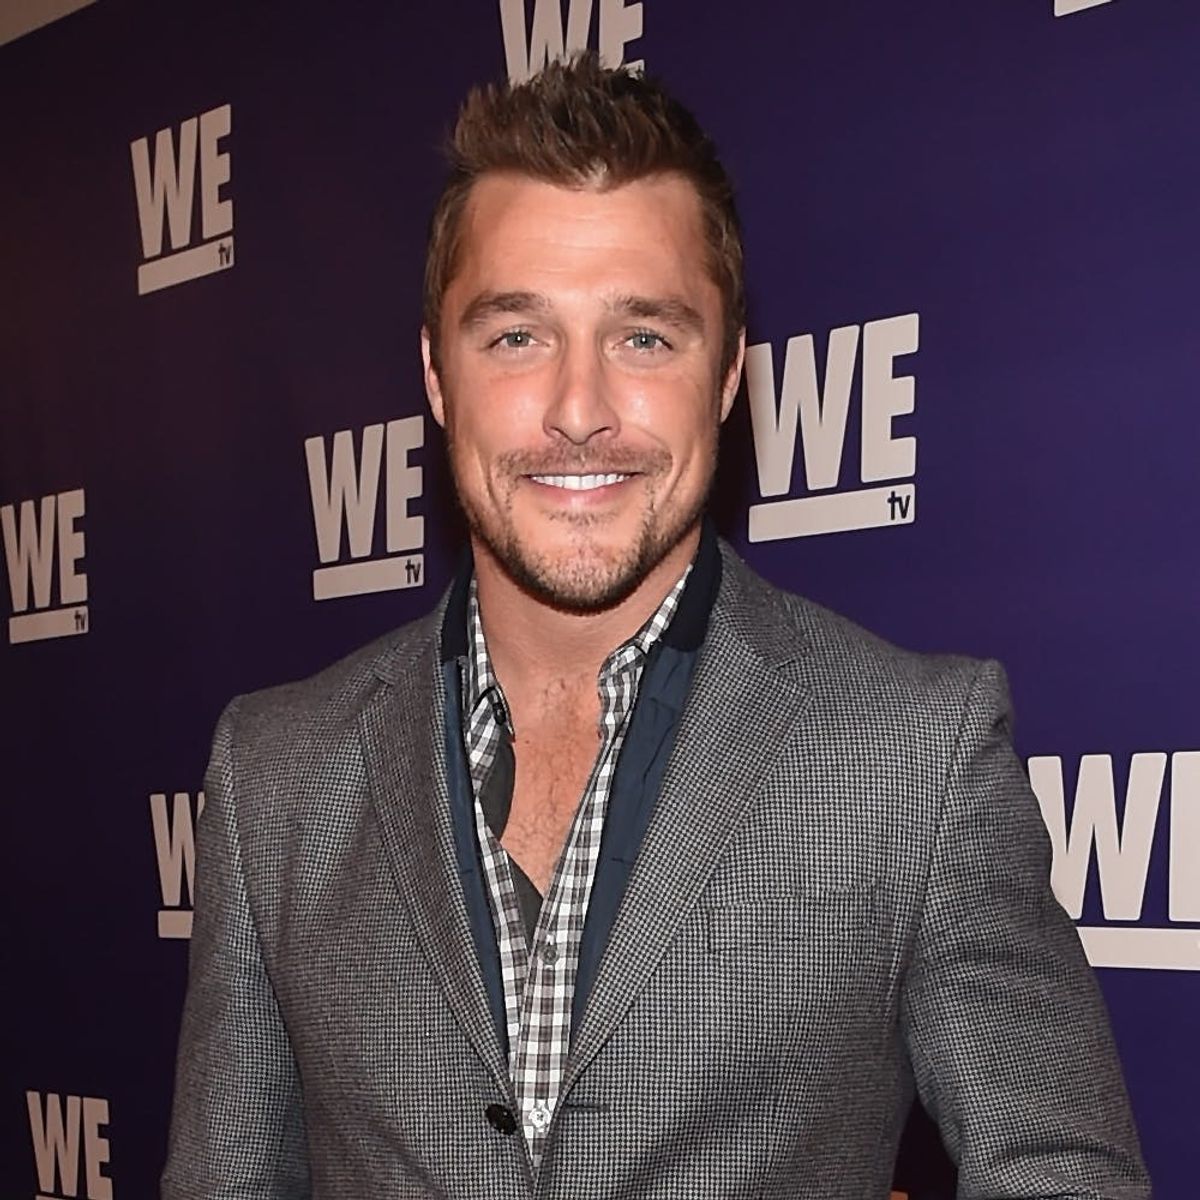 Bachelor Star Chris Soules Has Been Arrested for a Fatal Hit-and-Run